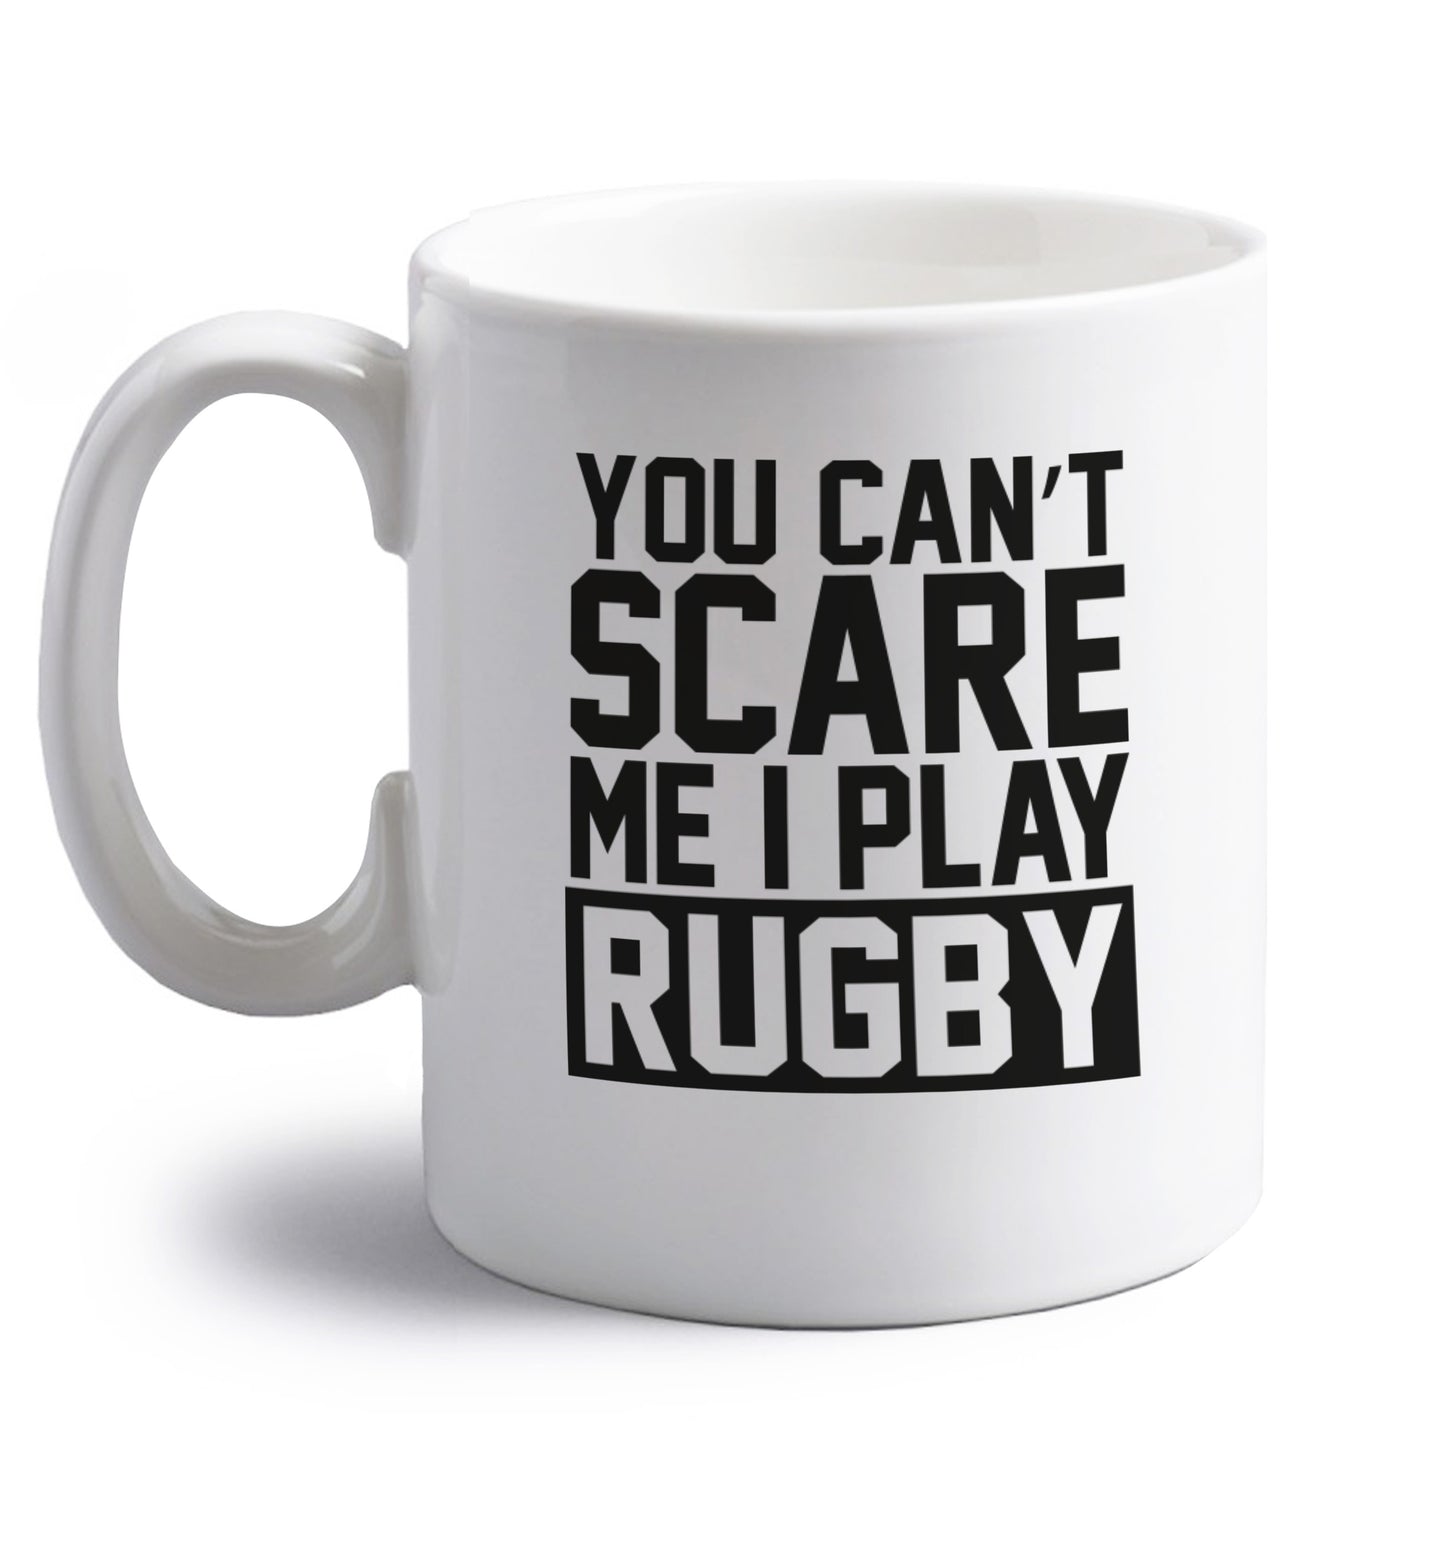 You can't scare me I play rugby right handed white ceramic mug 